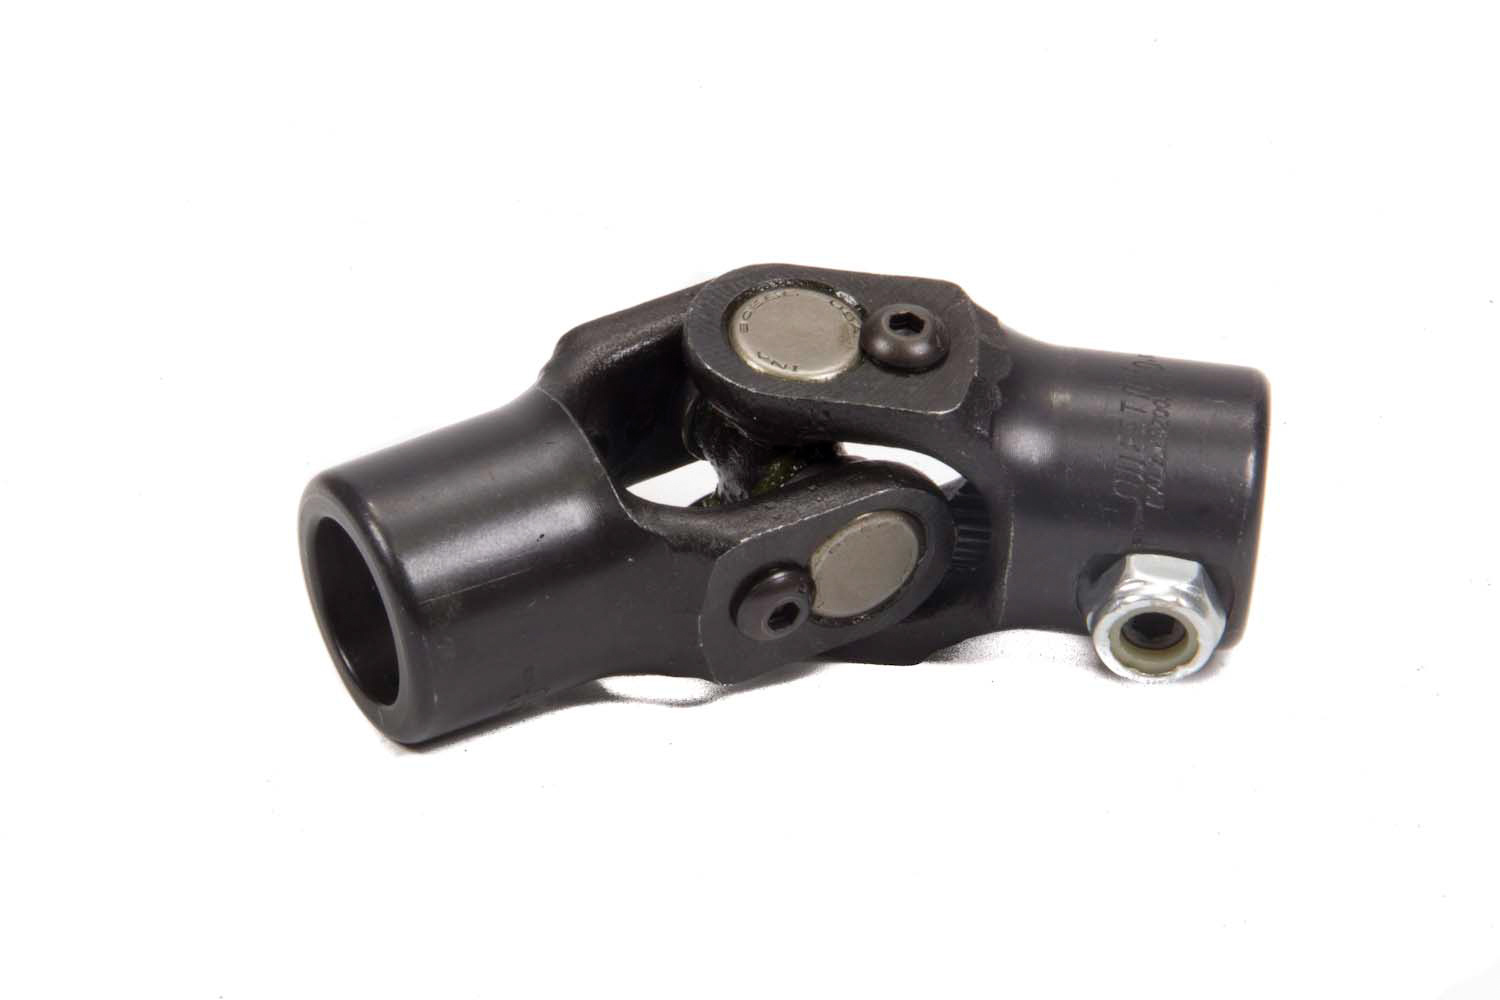 Sweet Manufacturing 401-51920 Steering Universal Joint, Single Joint, 3/4 in Double D to 1 in Double D OEM, Steel, Black Paint, Each